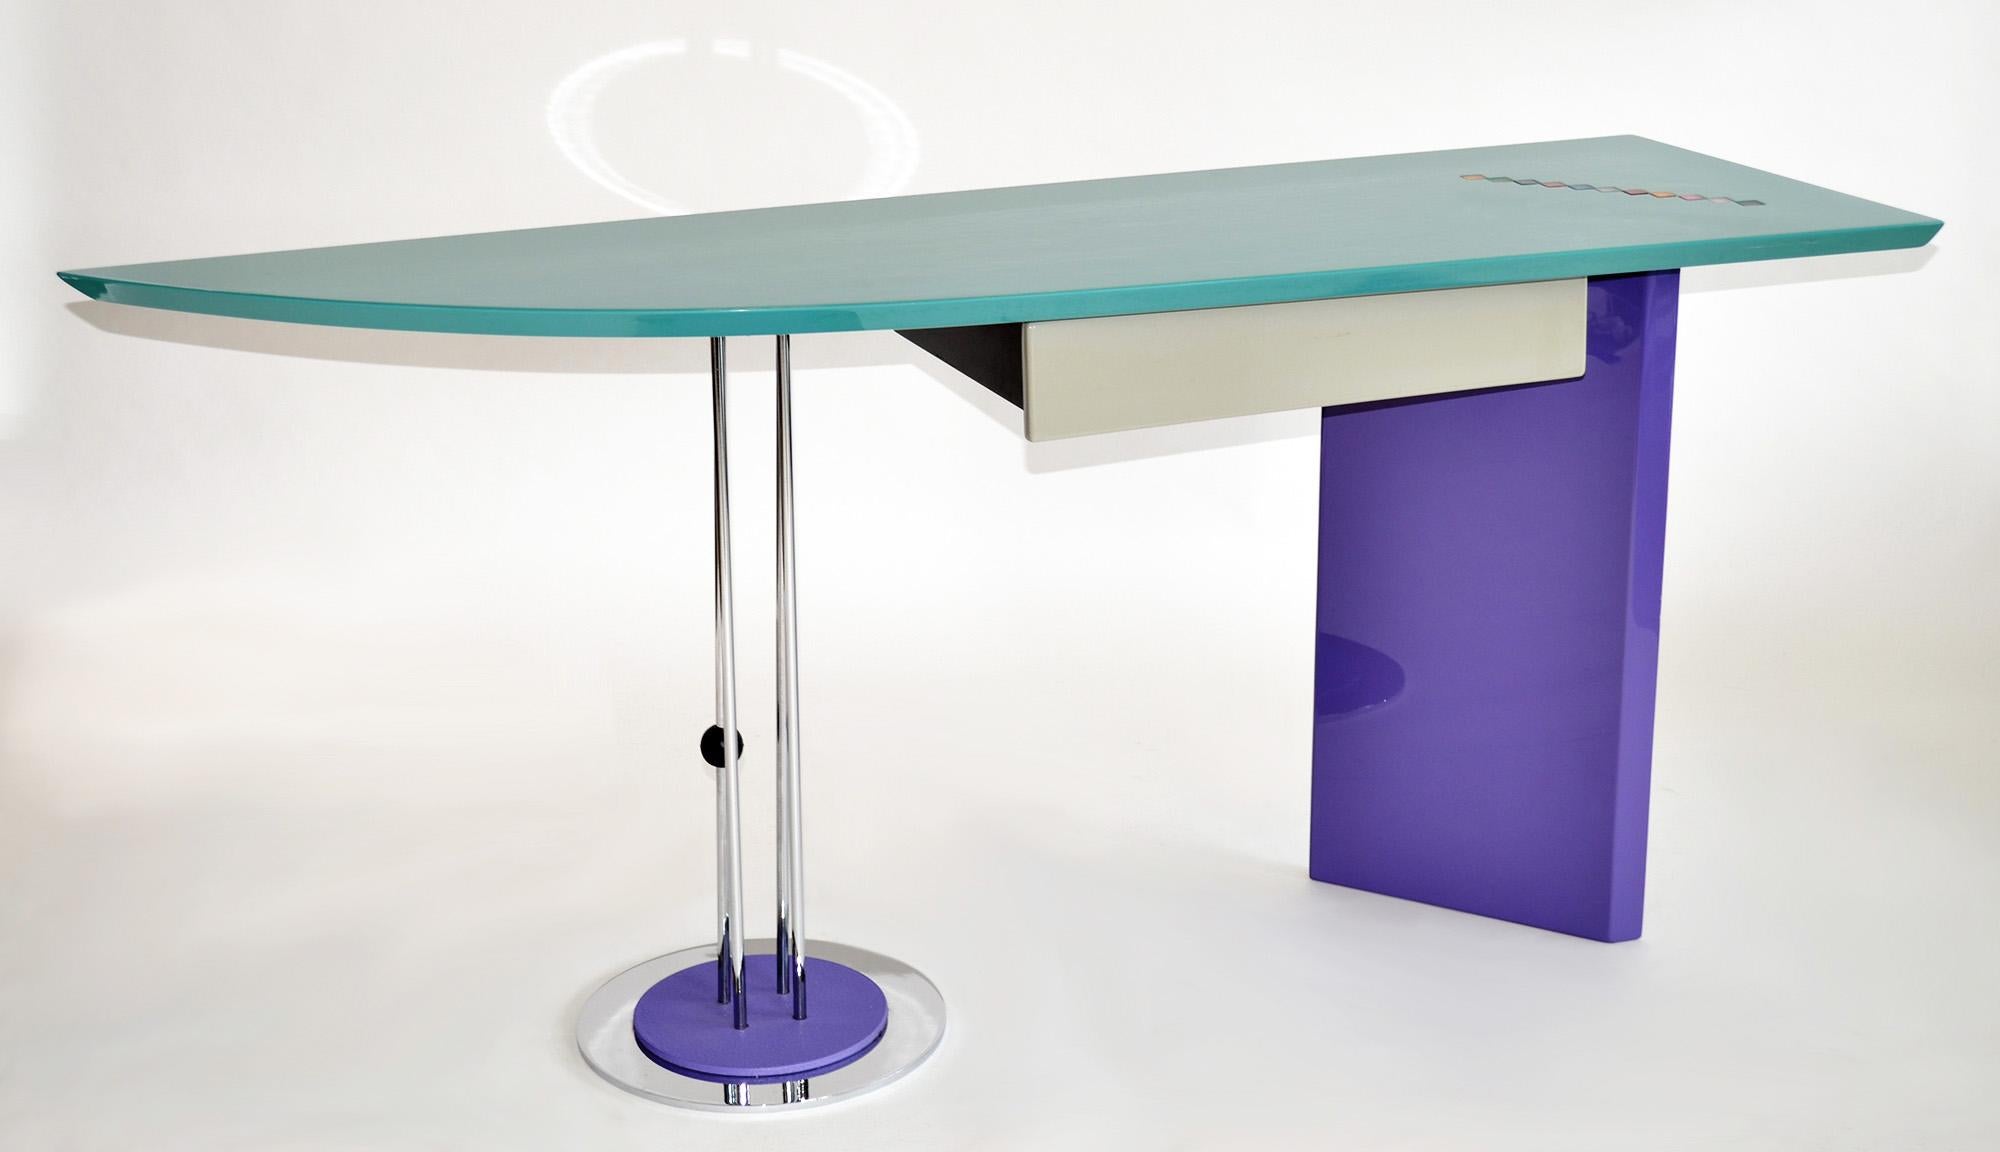 Post Modern Memphis Deco style writing desk by Saporiti Maurizio Salvato 1980s.
Bright 1980's Memphis-inspired, 'Miami Vice' color scheme in Purple, Turquoise and Gray gloss lacquer with colorful inlaid glass tile detail. Single Drawer. Lacquer,